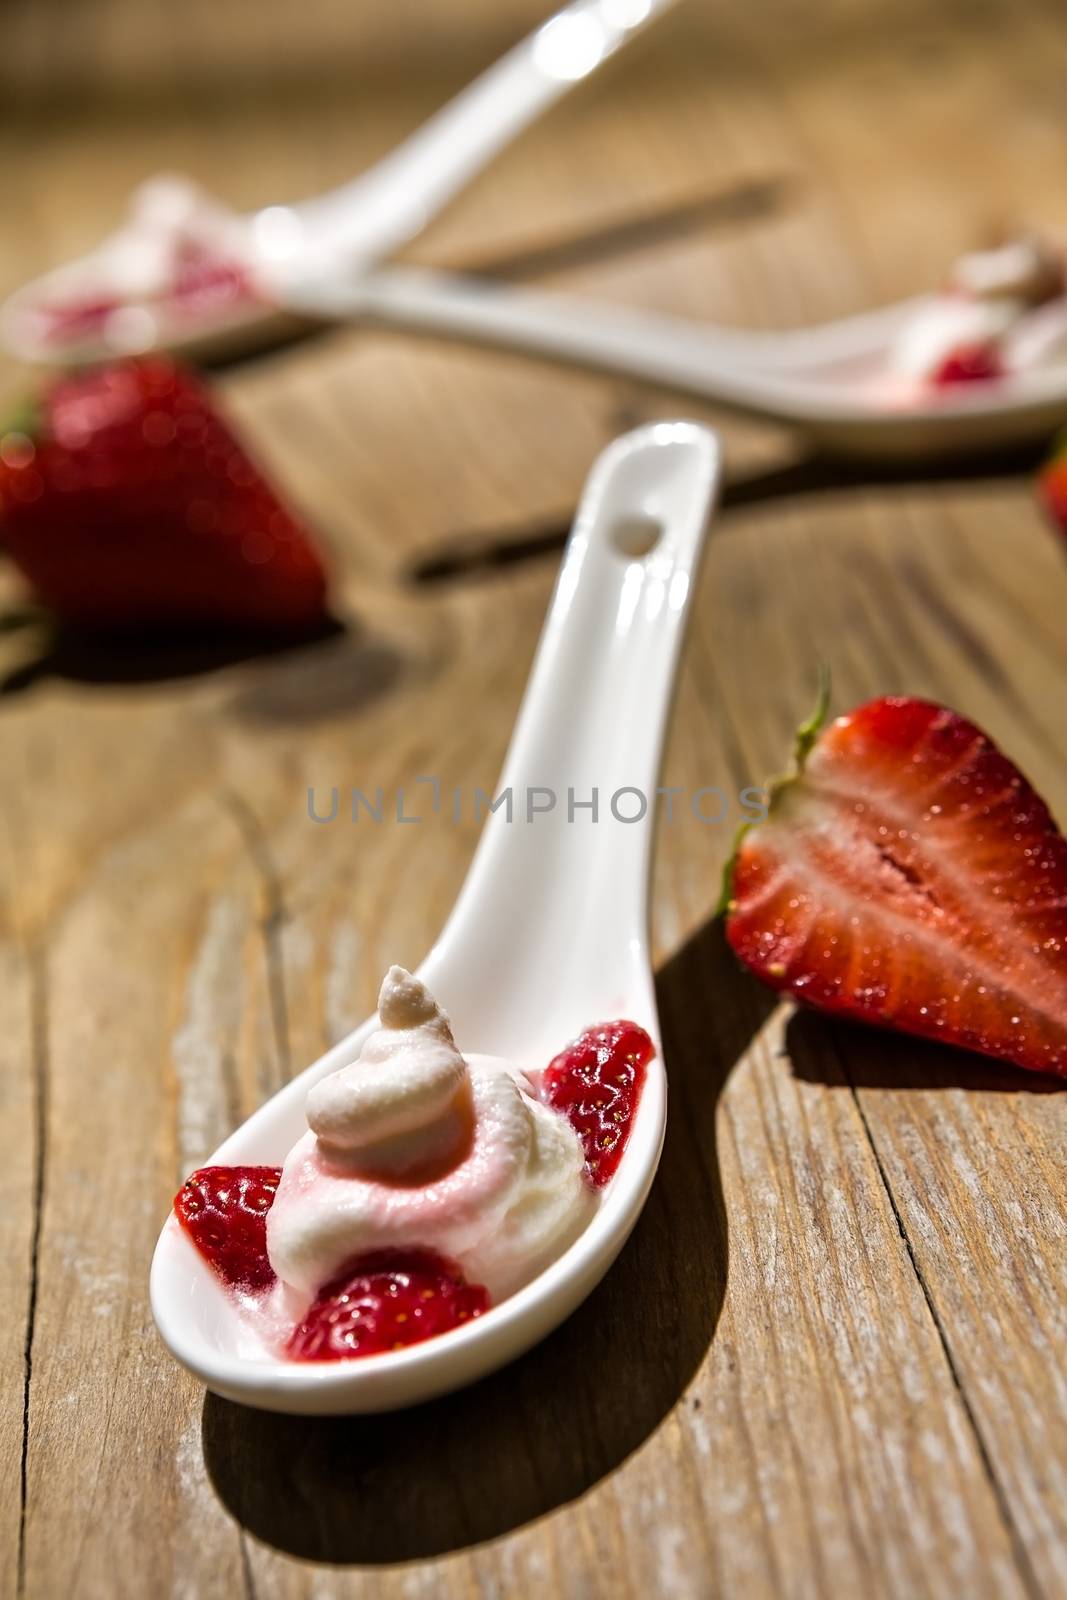 Close up of a mascarpone cheese and strawberries by LuigiMorbidelli